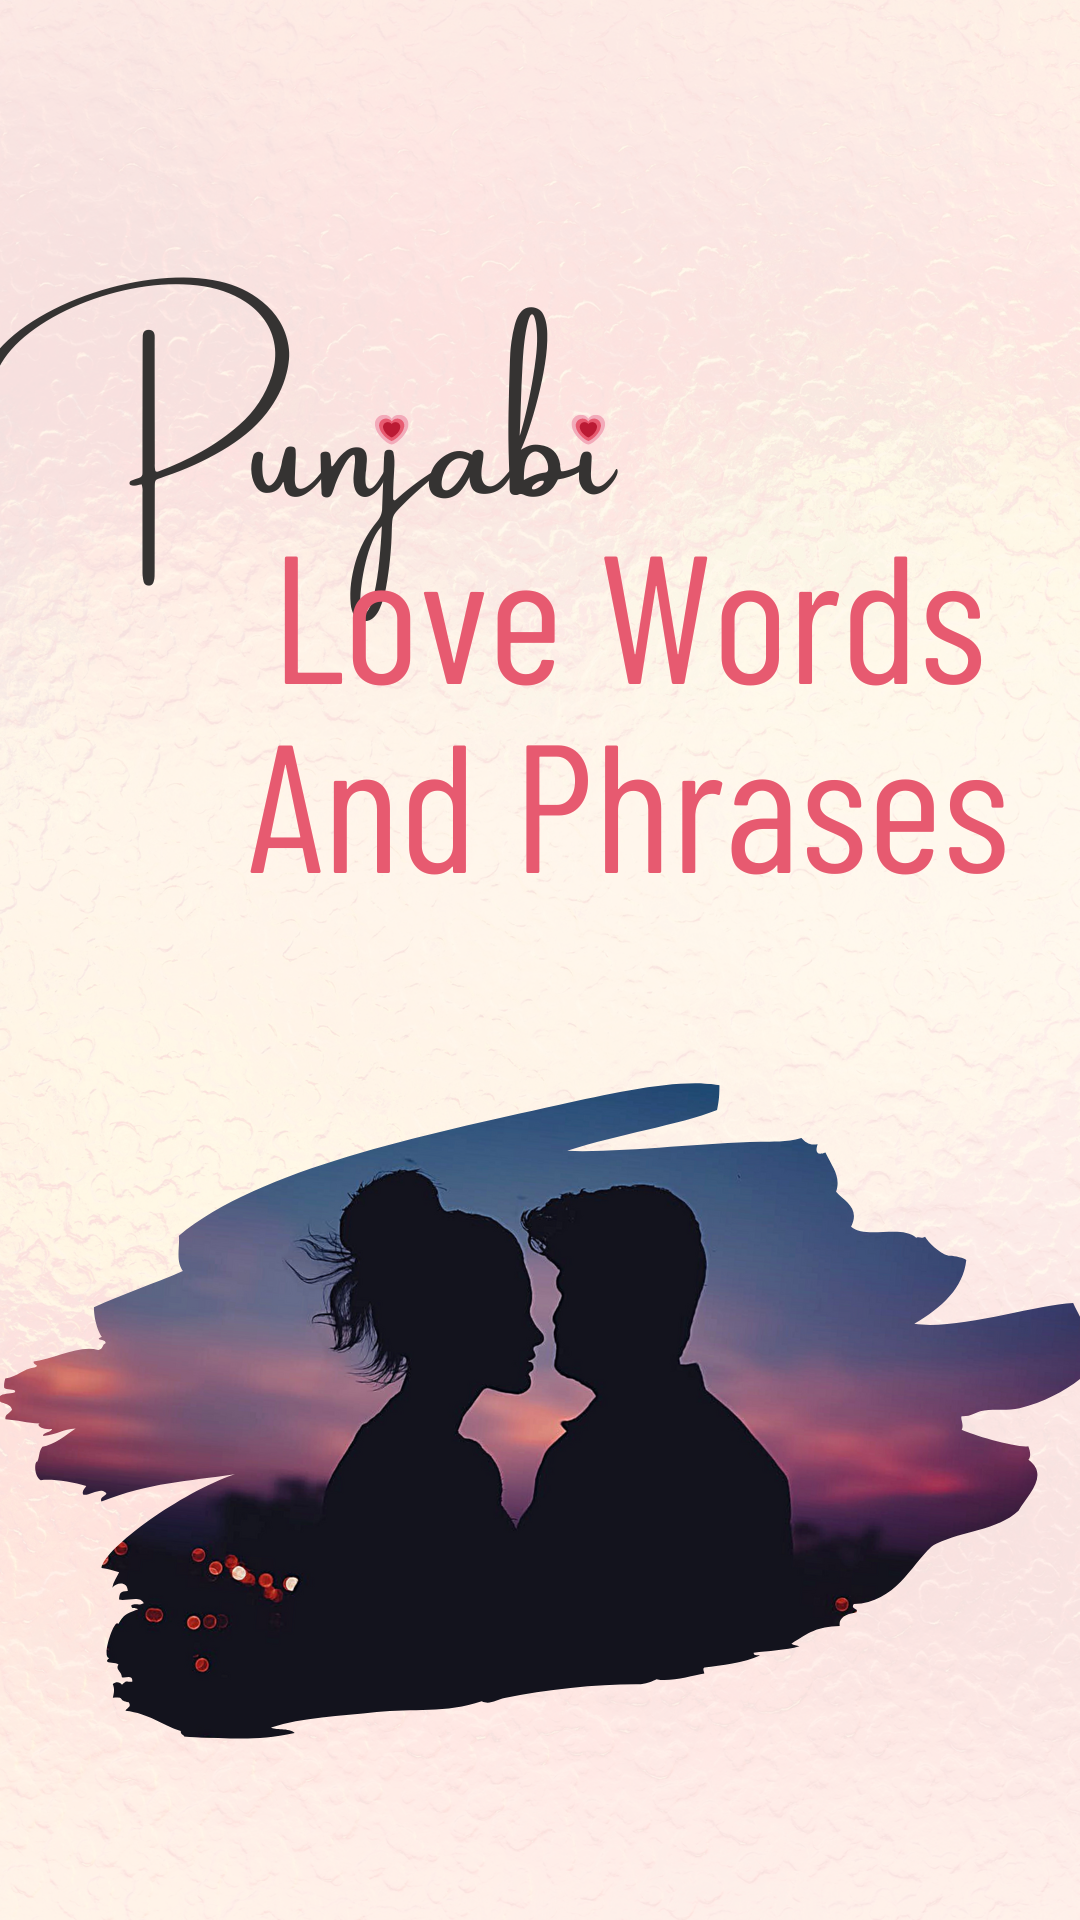 Punjabi Love Words And Phrases